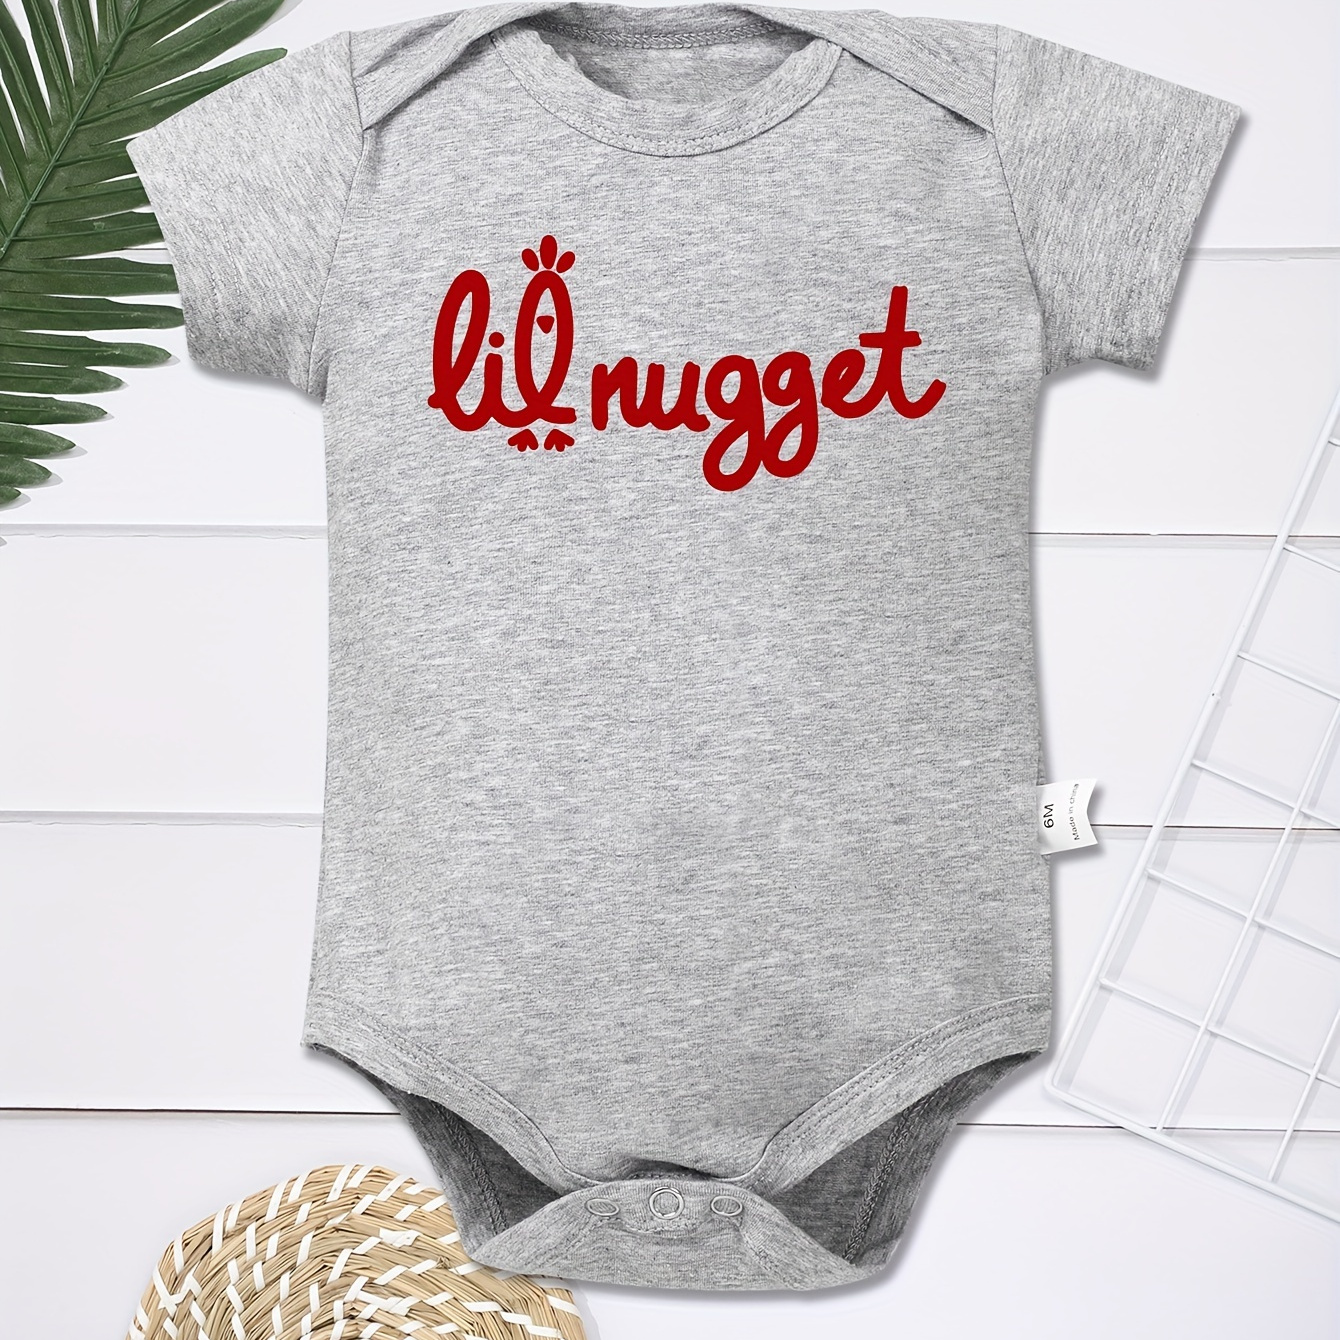 

Infant's "lil Nugget" Print Bodysuit, Comfy Short Sleeve Onesie, Baby Boy's Clothing, As Gift